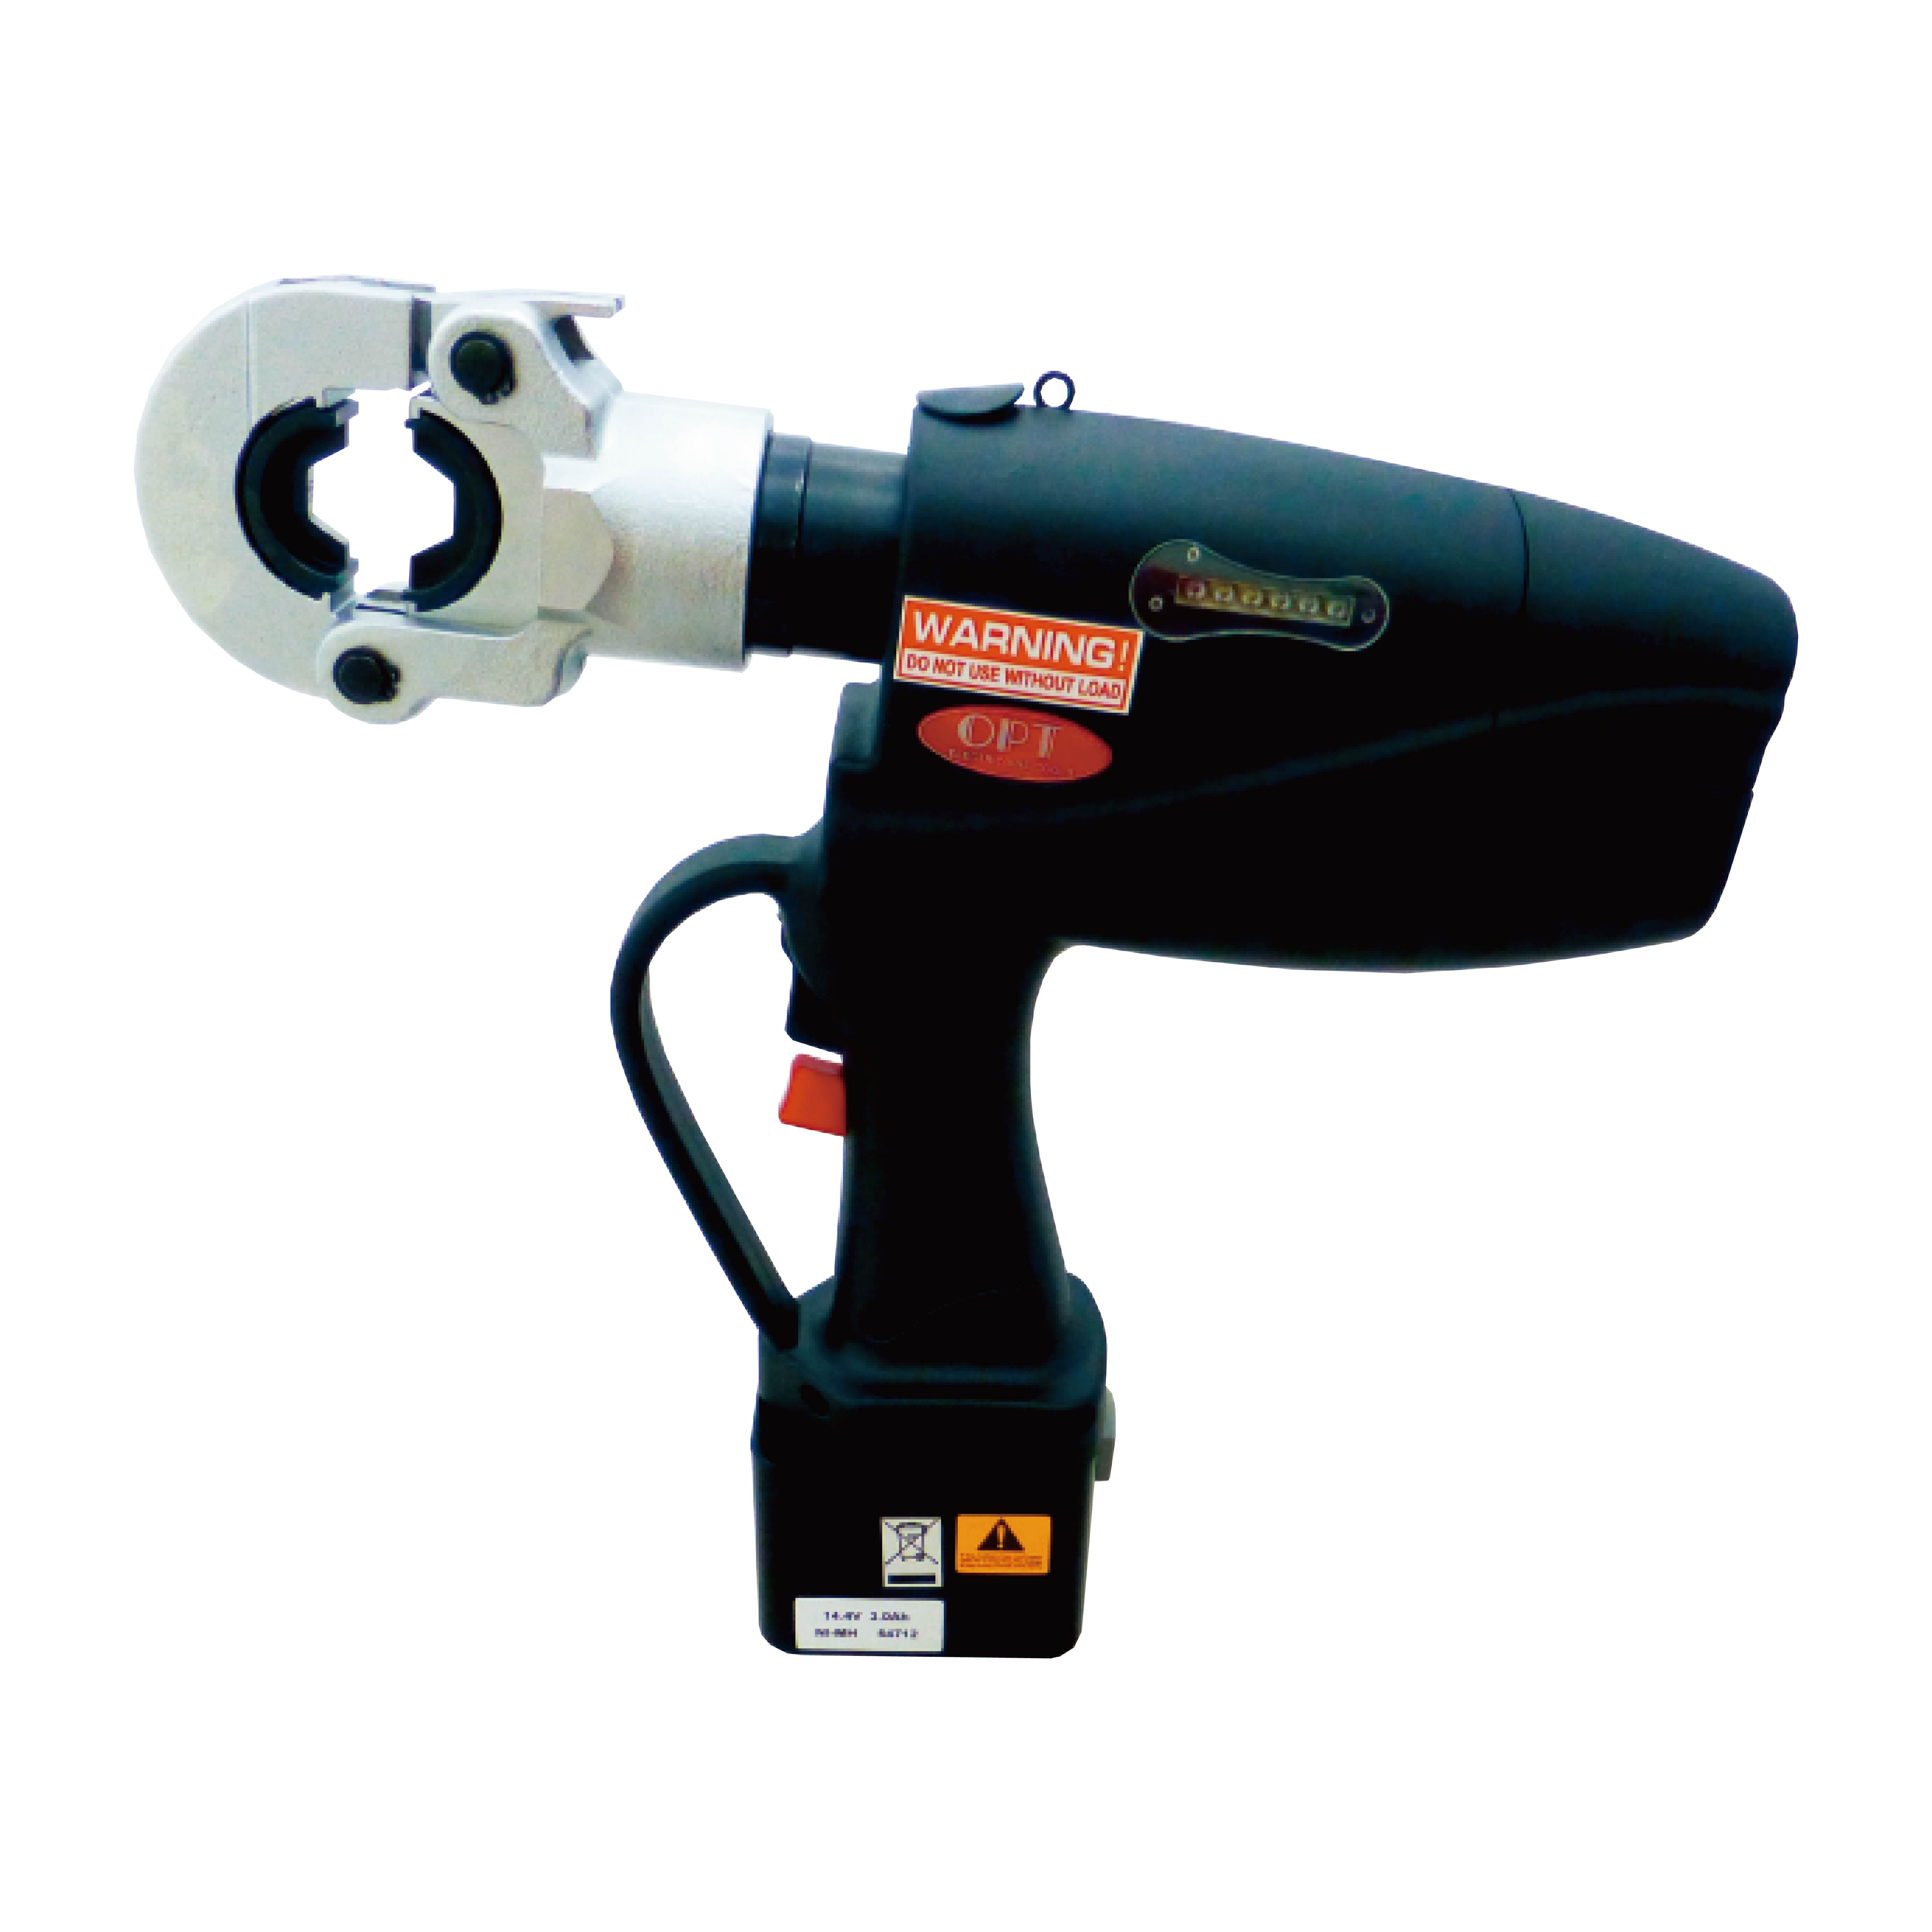 EPL-22 CORDLESS HYDRAULIC CRIMPING TOOLS-EPL-22